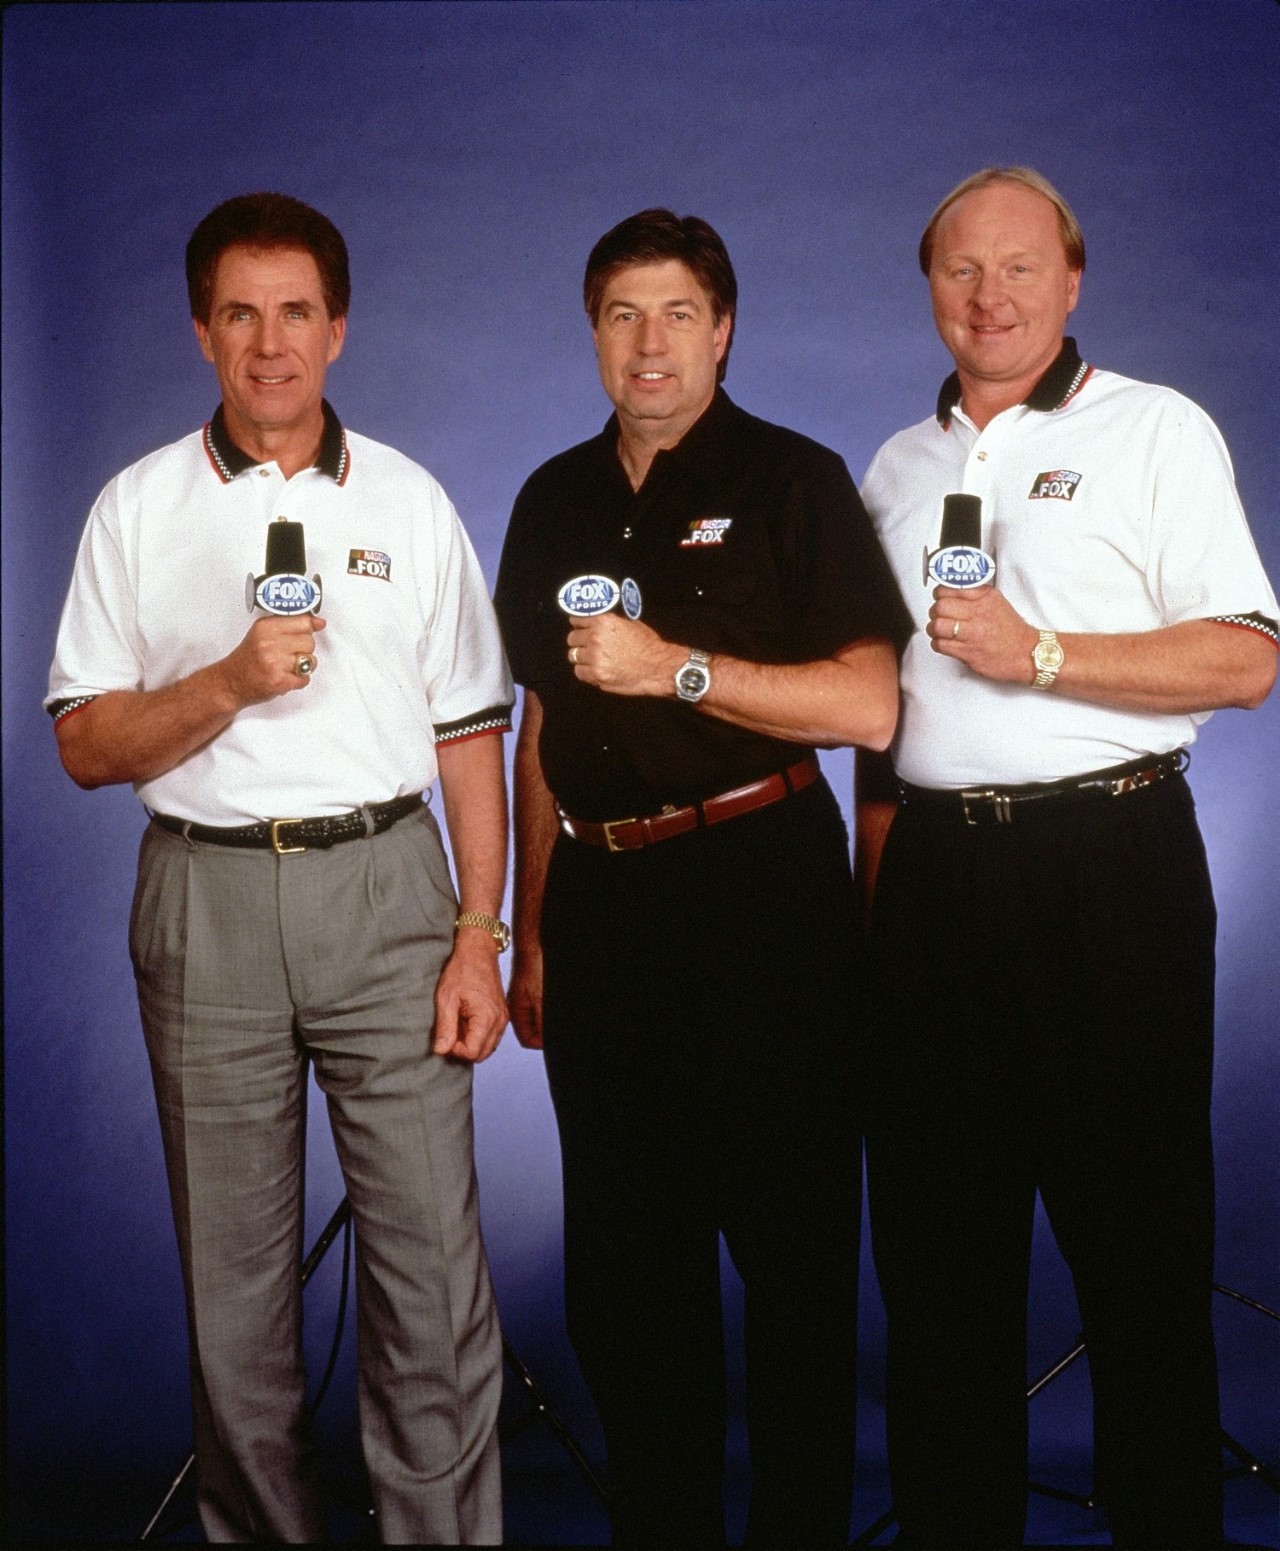 Back when it all began - Waltrip with Mike Joy and Larry McReynolds